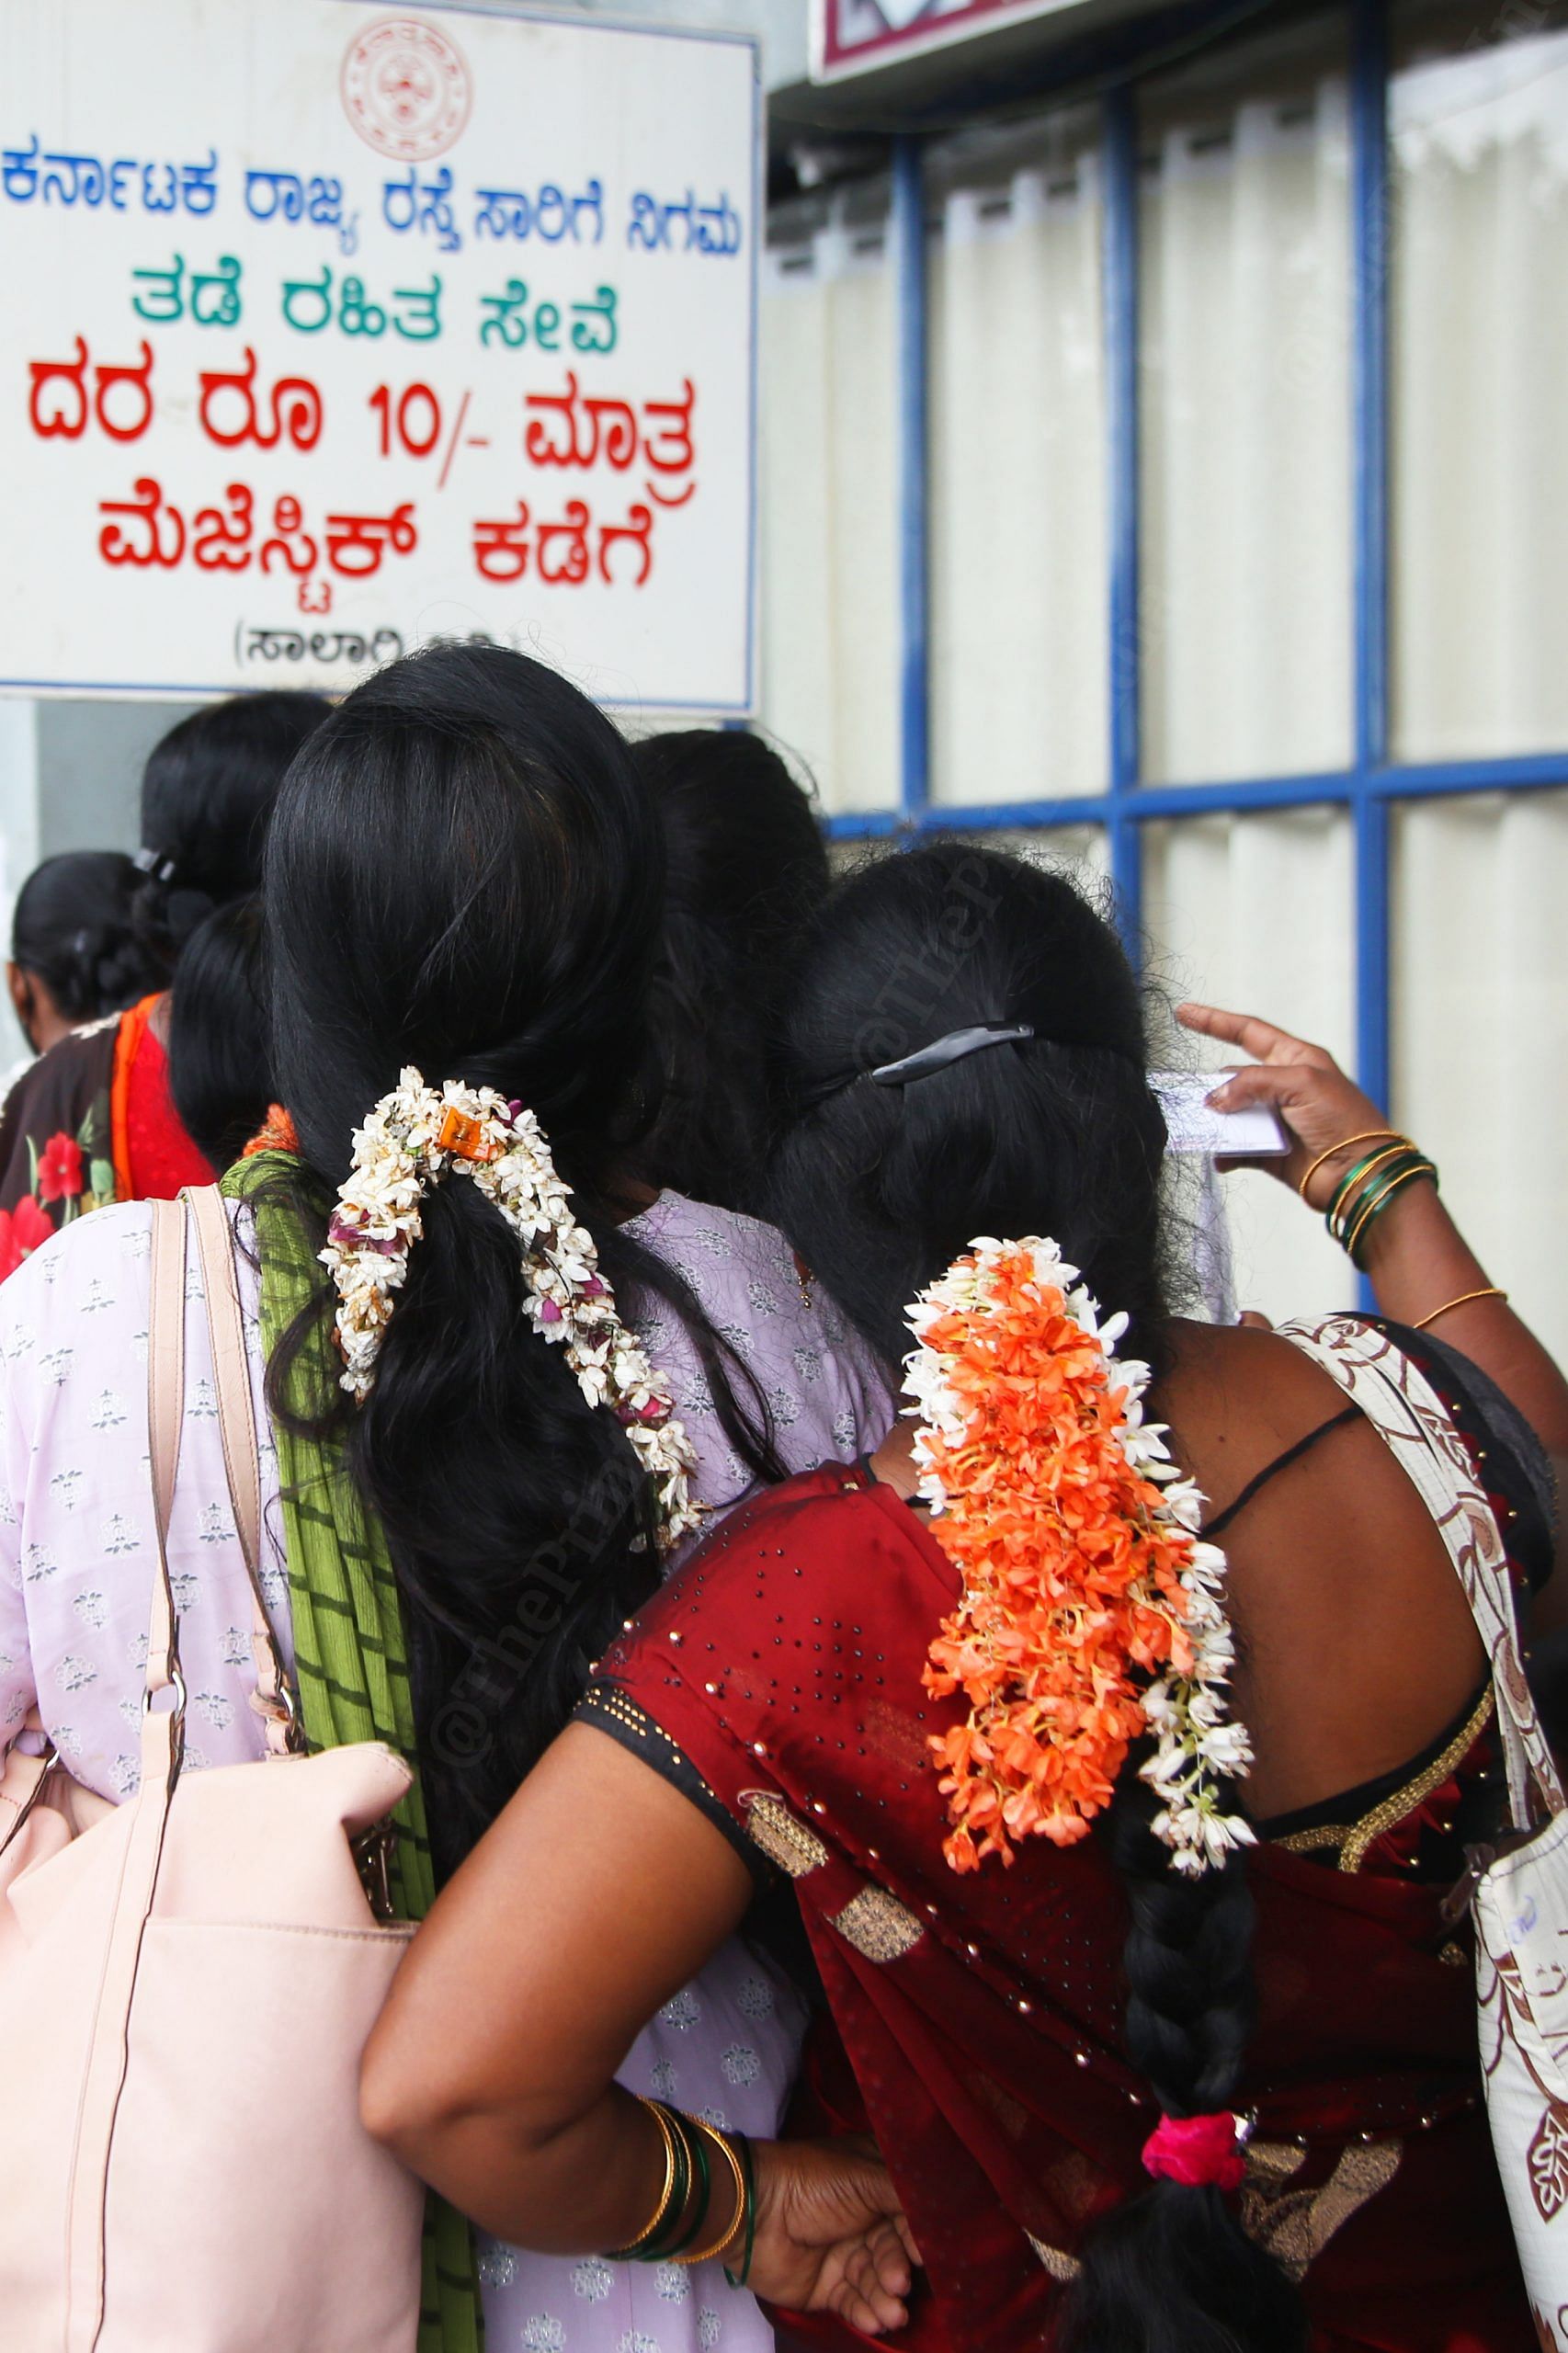 Women standing in a queue to get tickets at the Mysore bus stand | Manisha Mondal, ThePrint